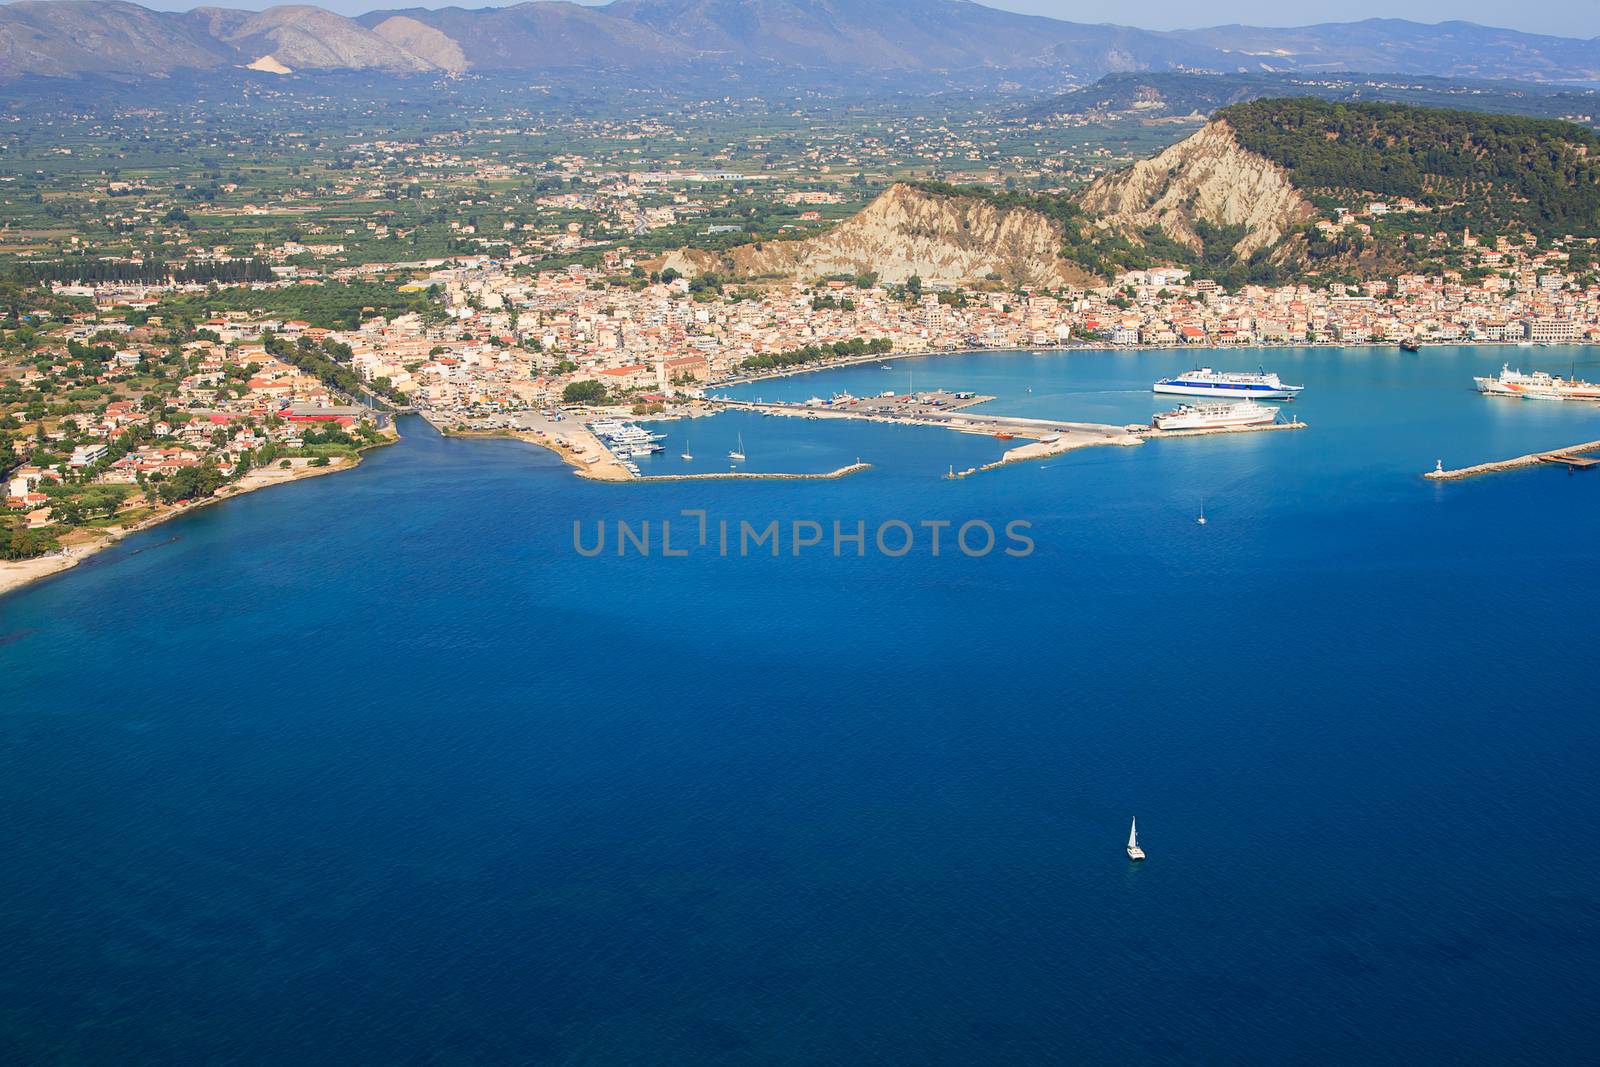 the island of Zakynthos Greece from the air by Netfalls